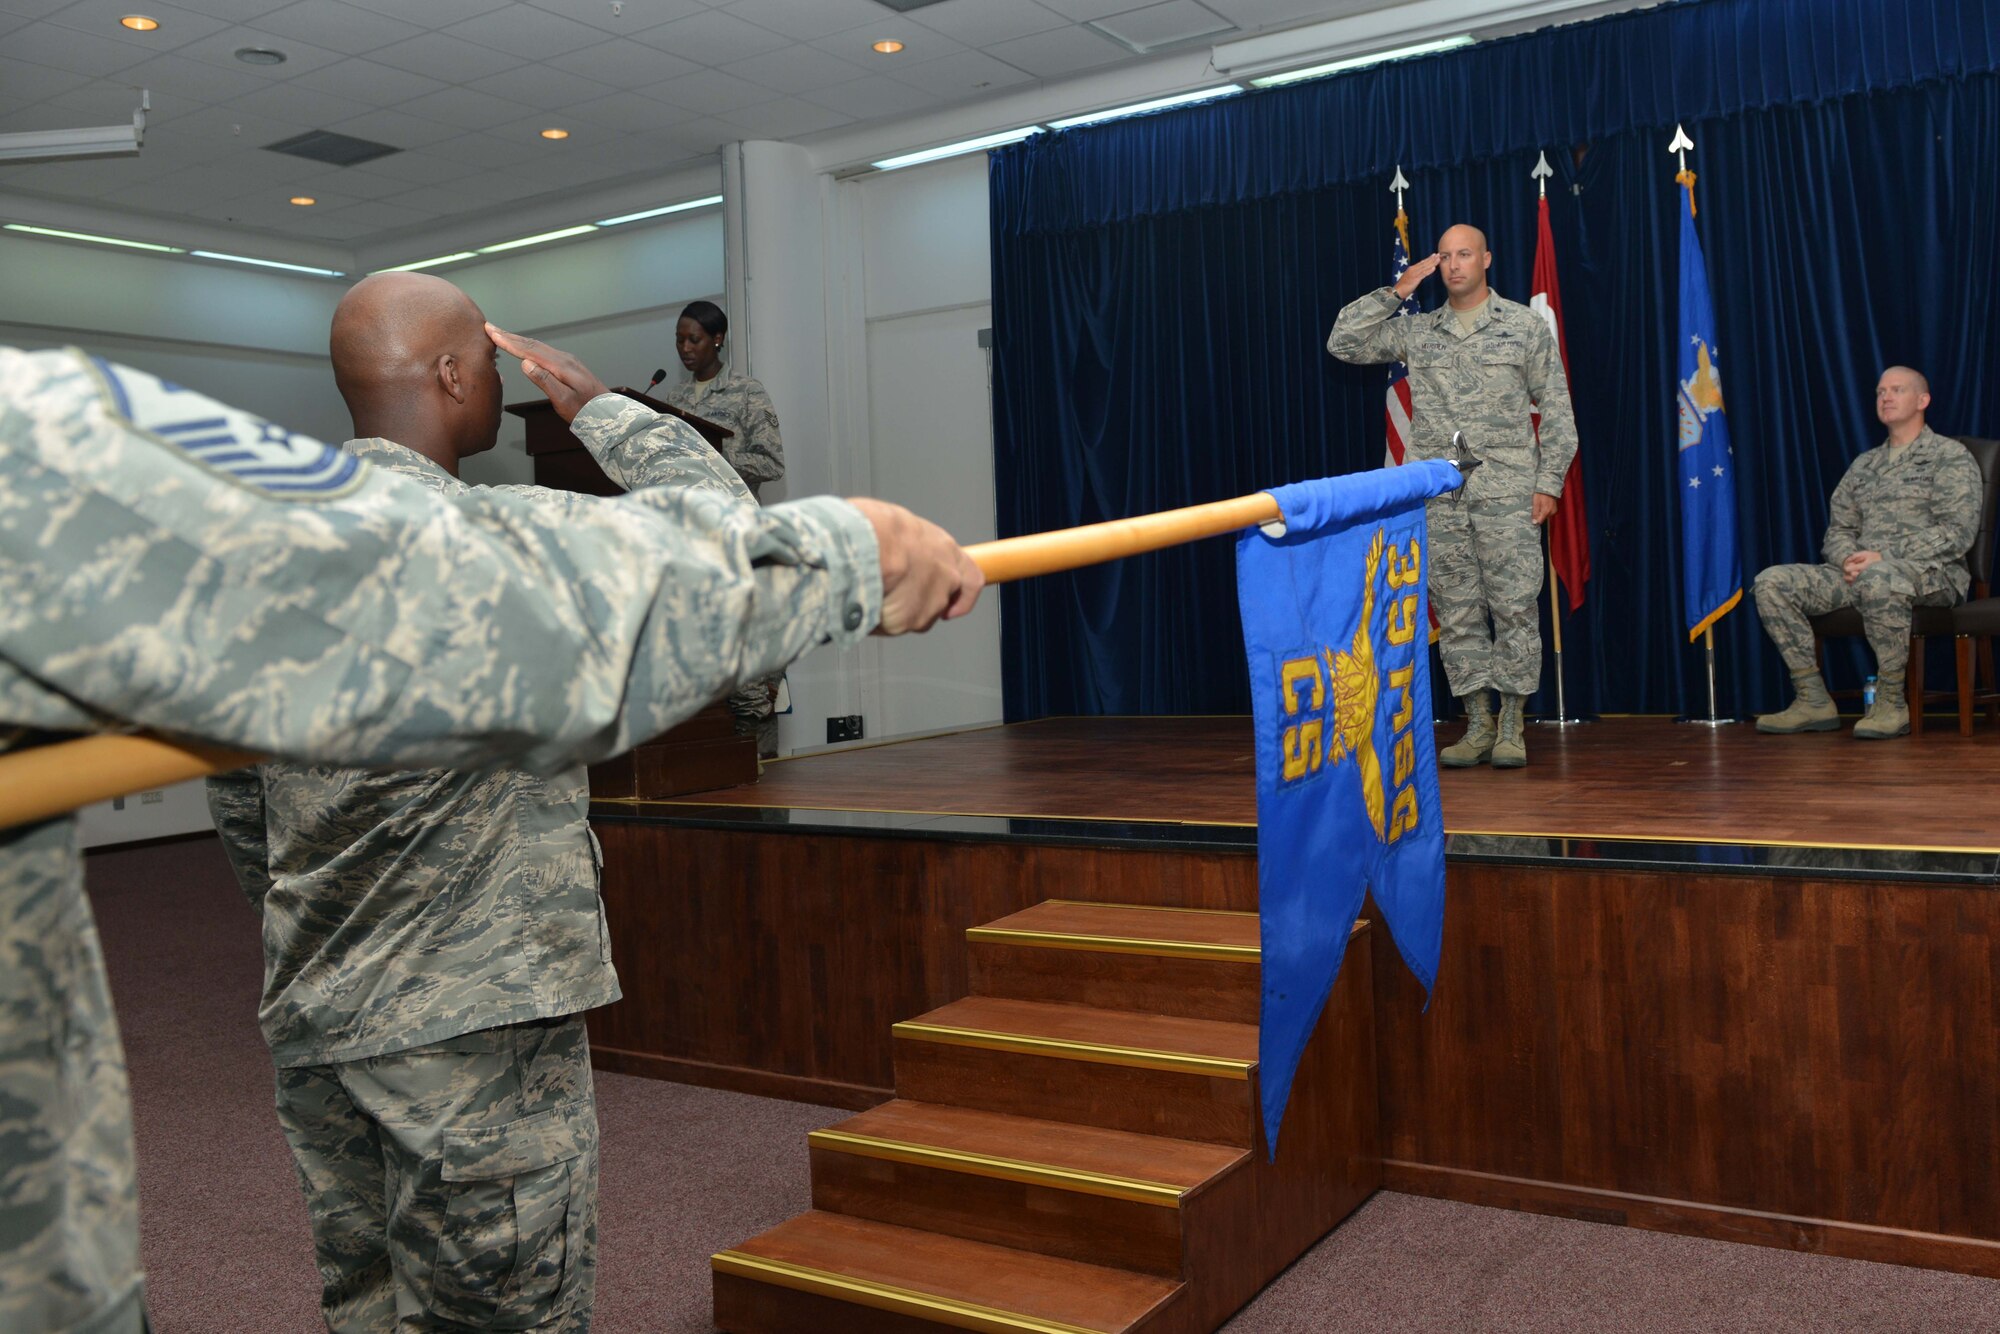 U.S. Air Force Lt. Col. Timothy Meerstein, 39th Communications Squadron incoming commander, renders his first salute to squadron personnel during a change of command ceremony June 14, 2016, at Incirlik Air Base, Turkey. The 39th CS commander is responsible for the military, civilian, and contractor personnel providing command, control, communications, computer, information services to more than 5,000 military and civilian personnel within the 39th Air Base Wing, tenant units and five geographically separated units throughout Turkey. (U.S. Air Force photo by Senior Airman John Nieves Camacho/Released)